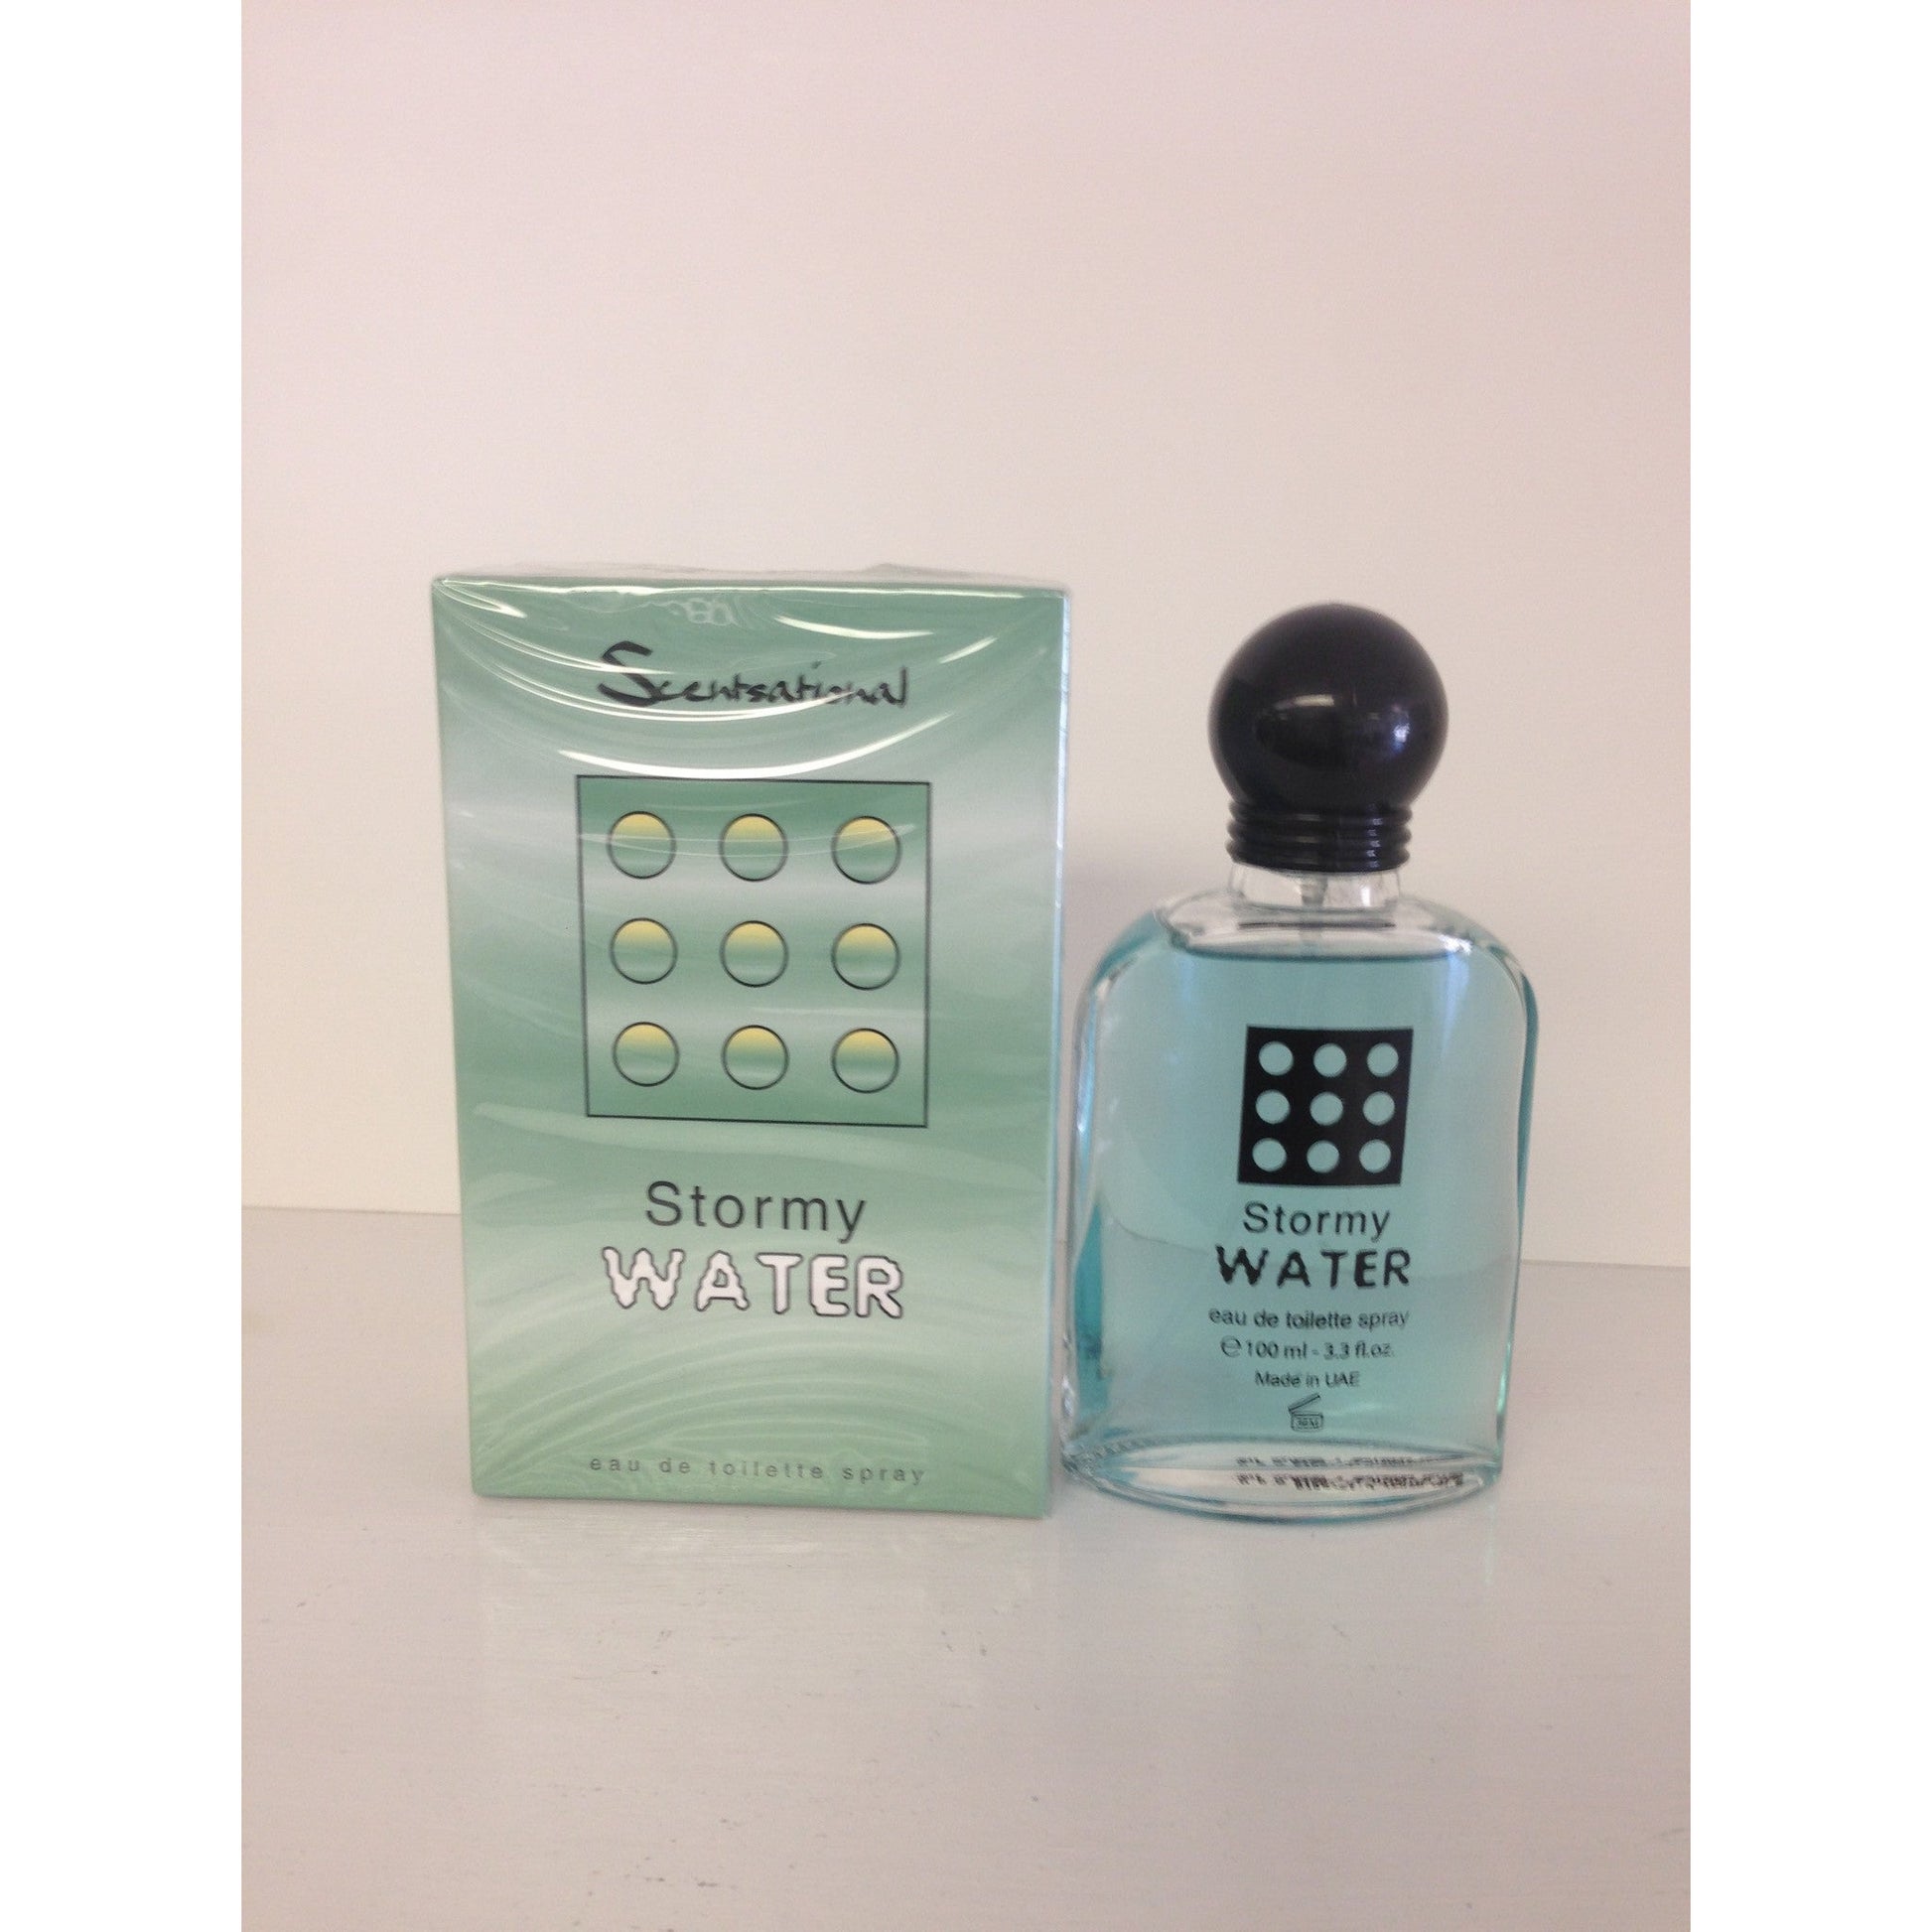 Stormy Water - world scents and More